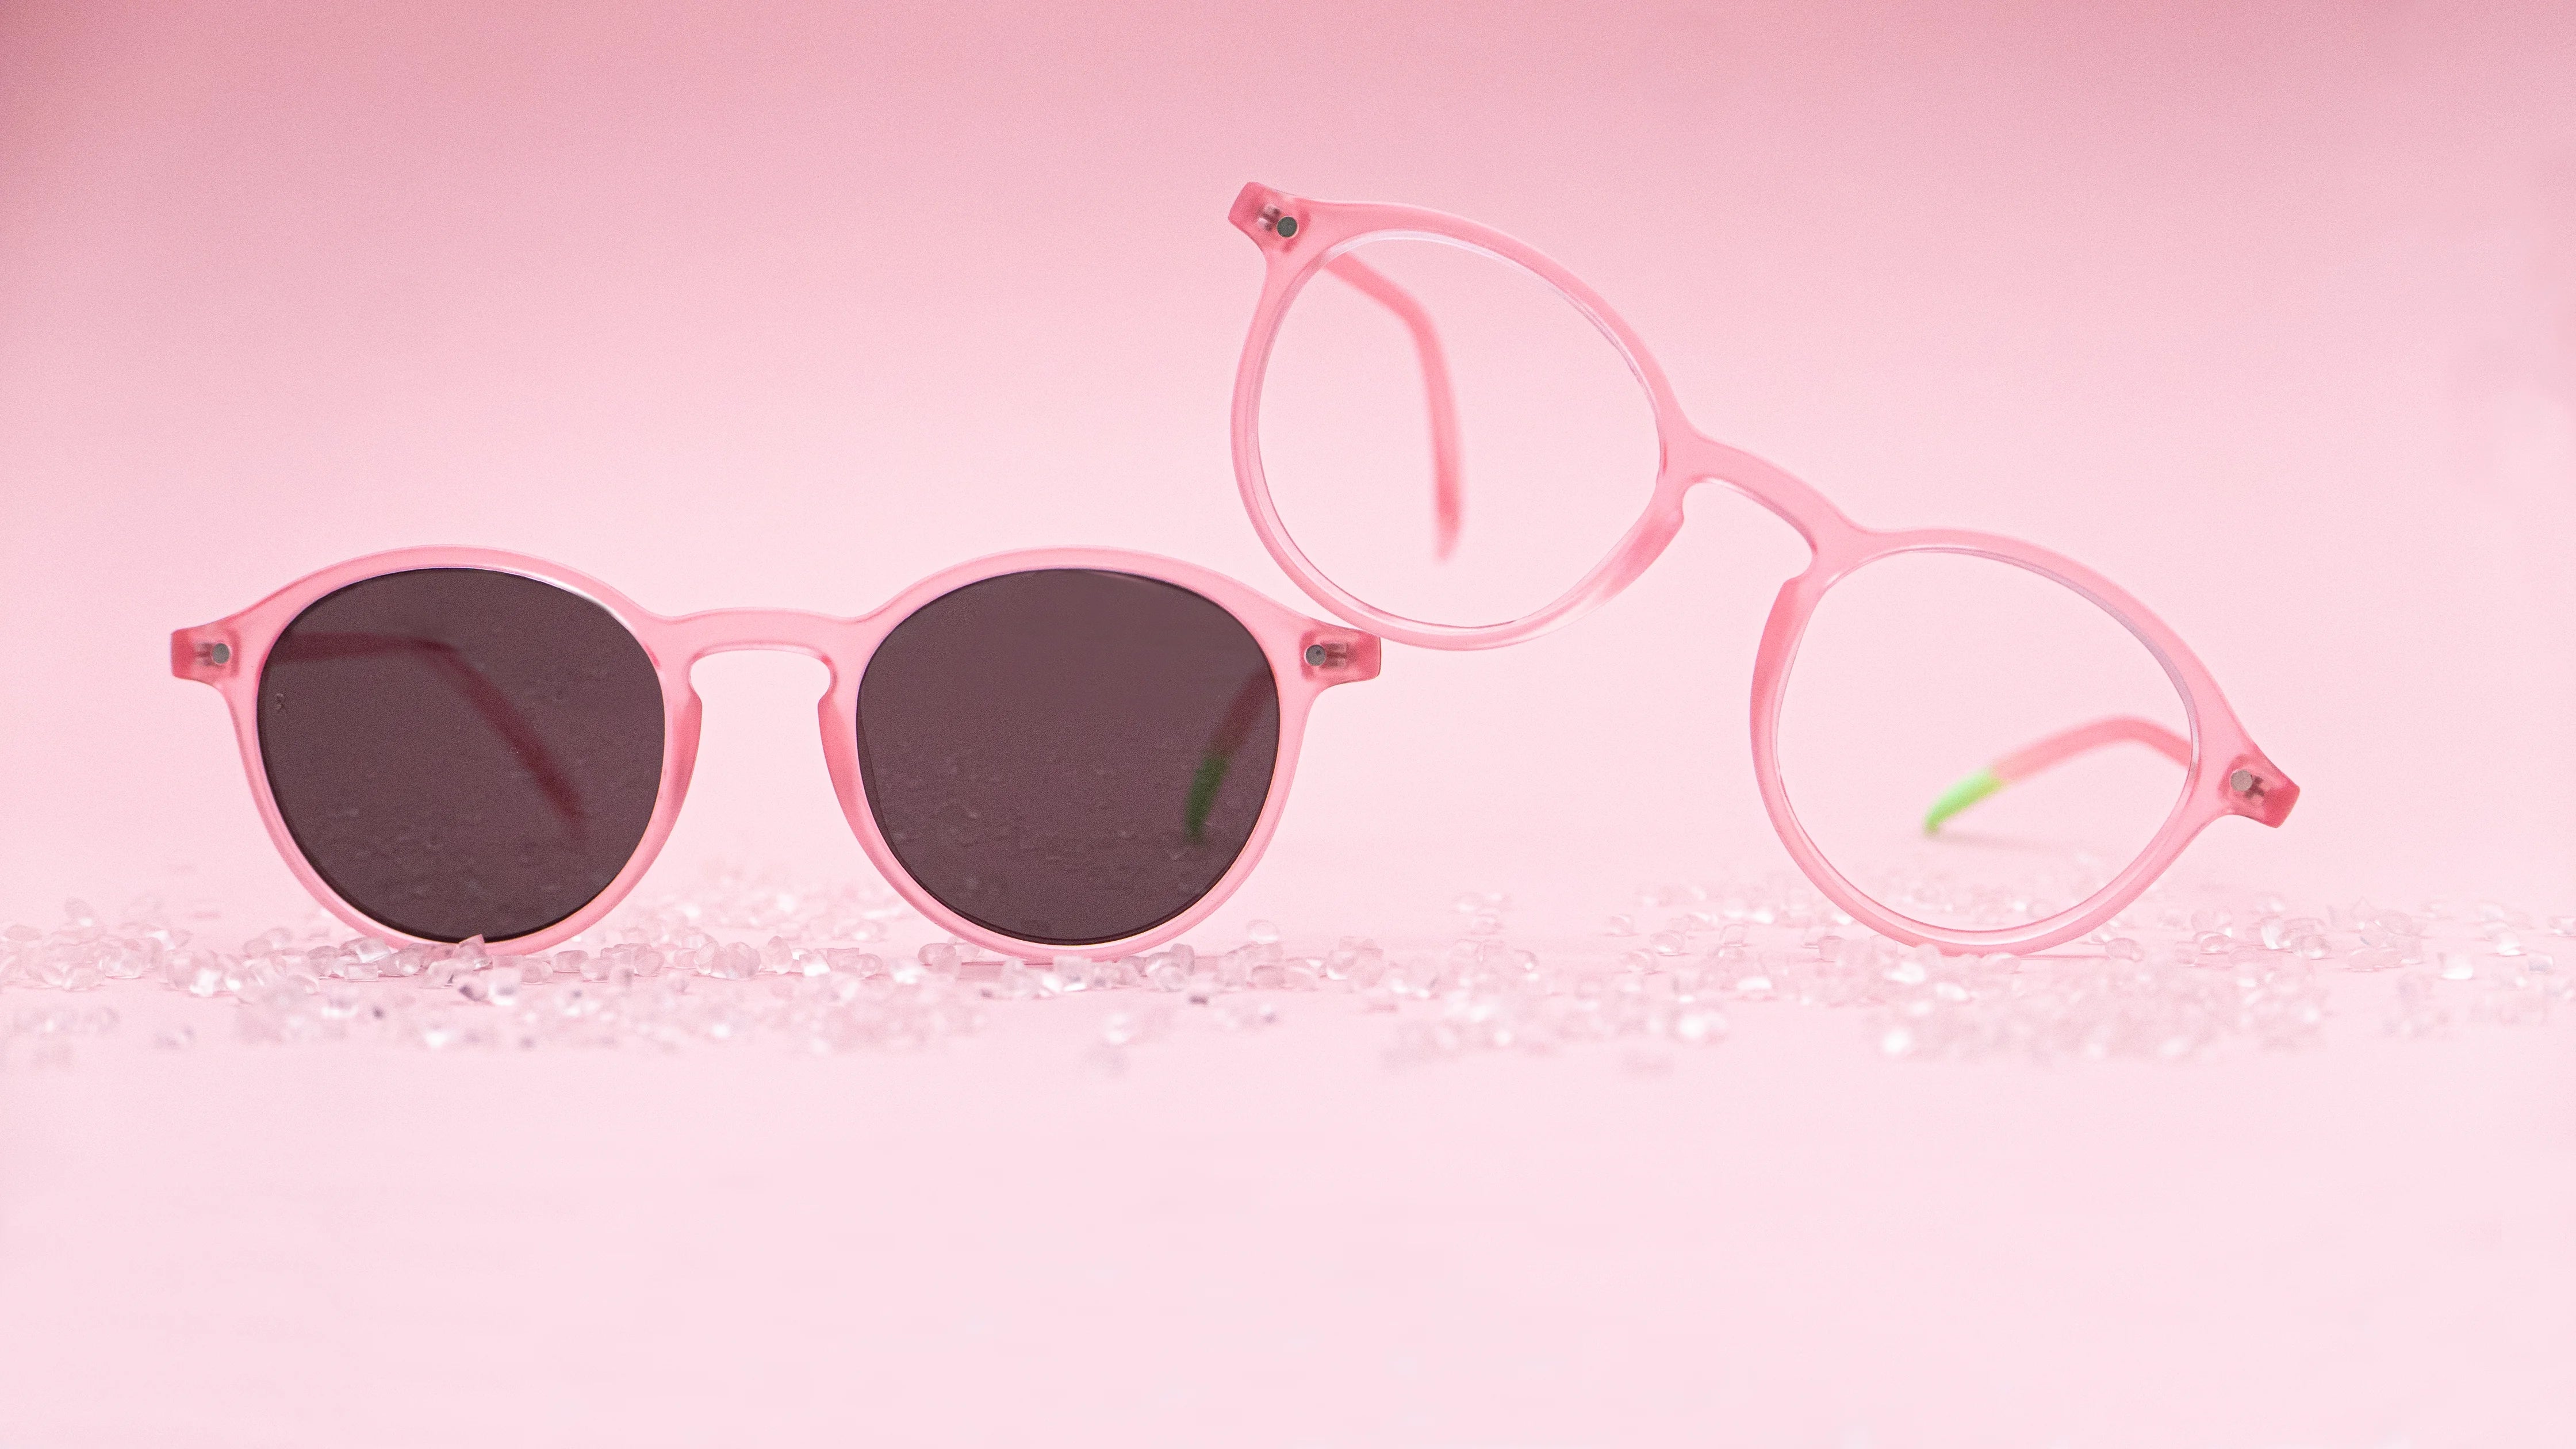 Photograph of 'La Vue En Rose' sunglasses and optical frames. The optical frame overlaps the sunglasses frame. Both frames are surrounded by plastic granules.